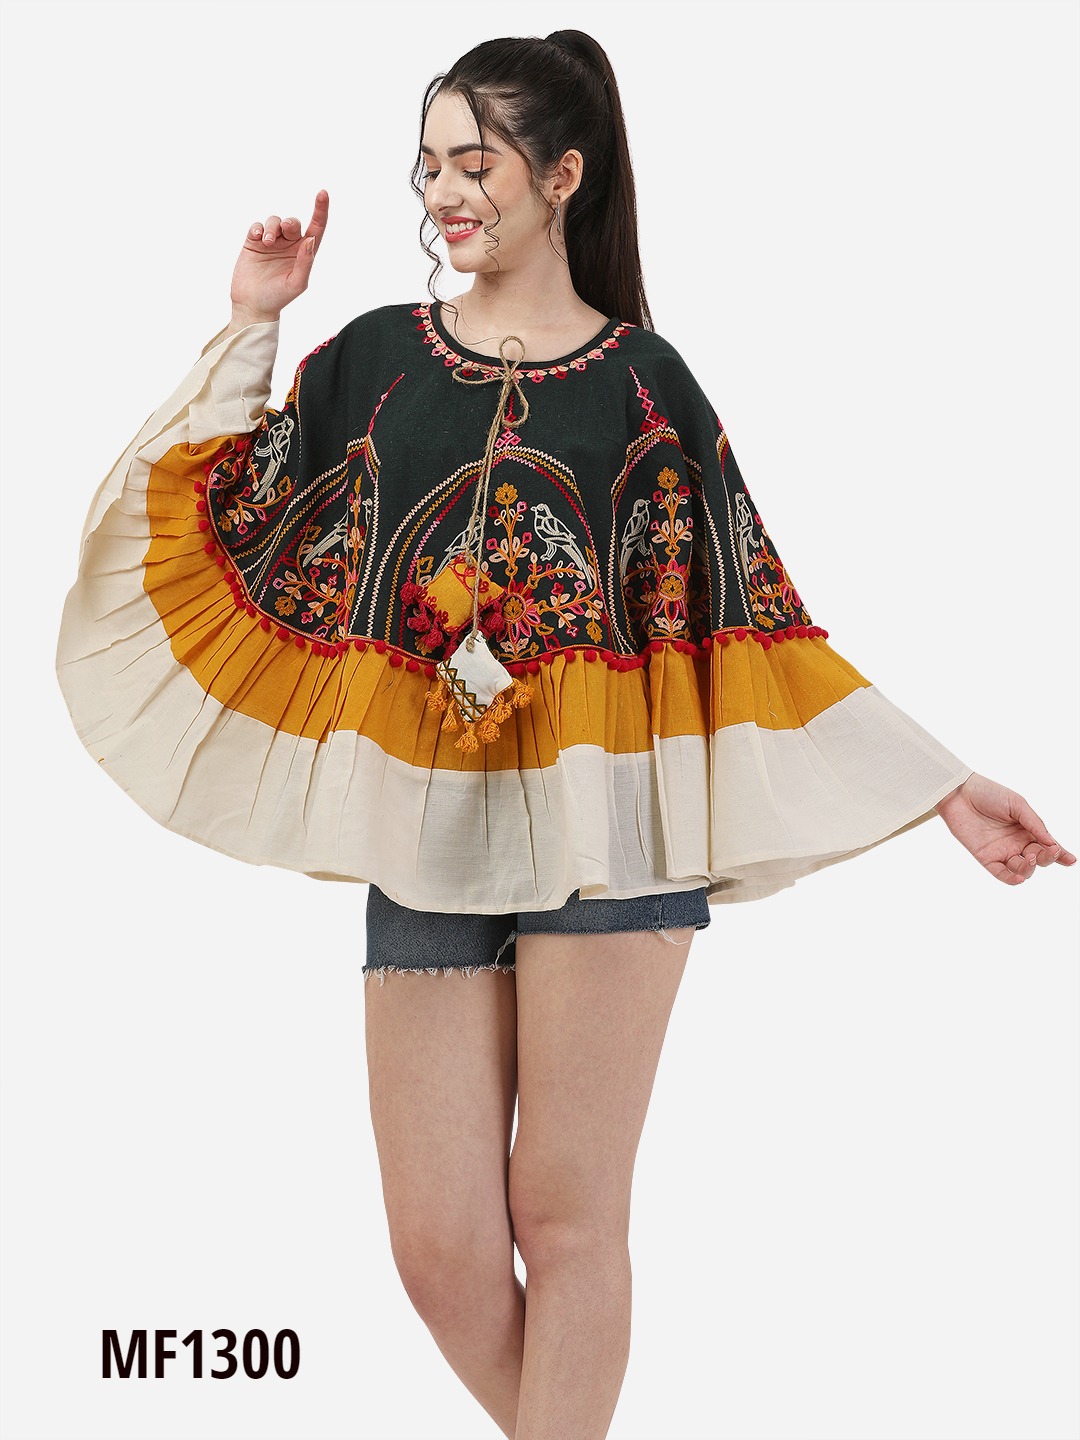 CIRCULAR PONCHO Minute woollen and jute embroidery both front and back decorated by Dazzling laces with acrylic embroidery.